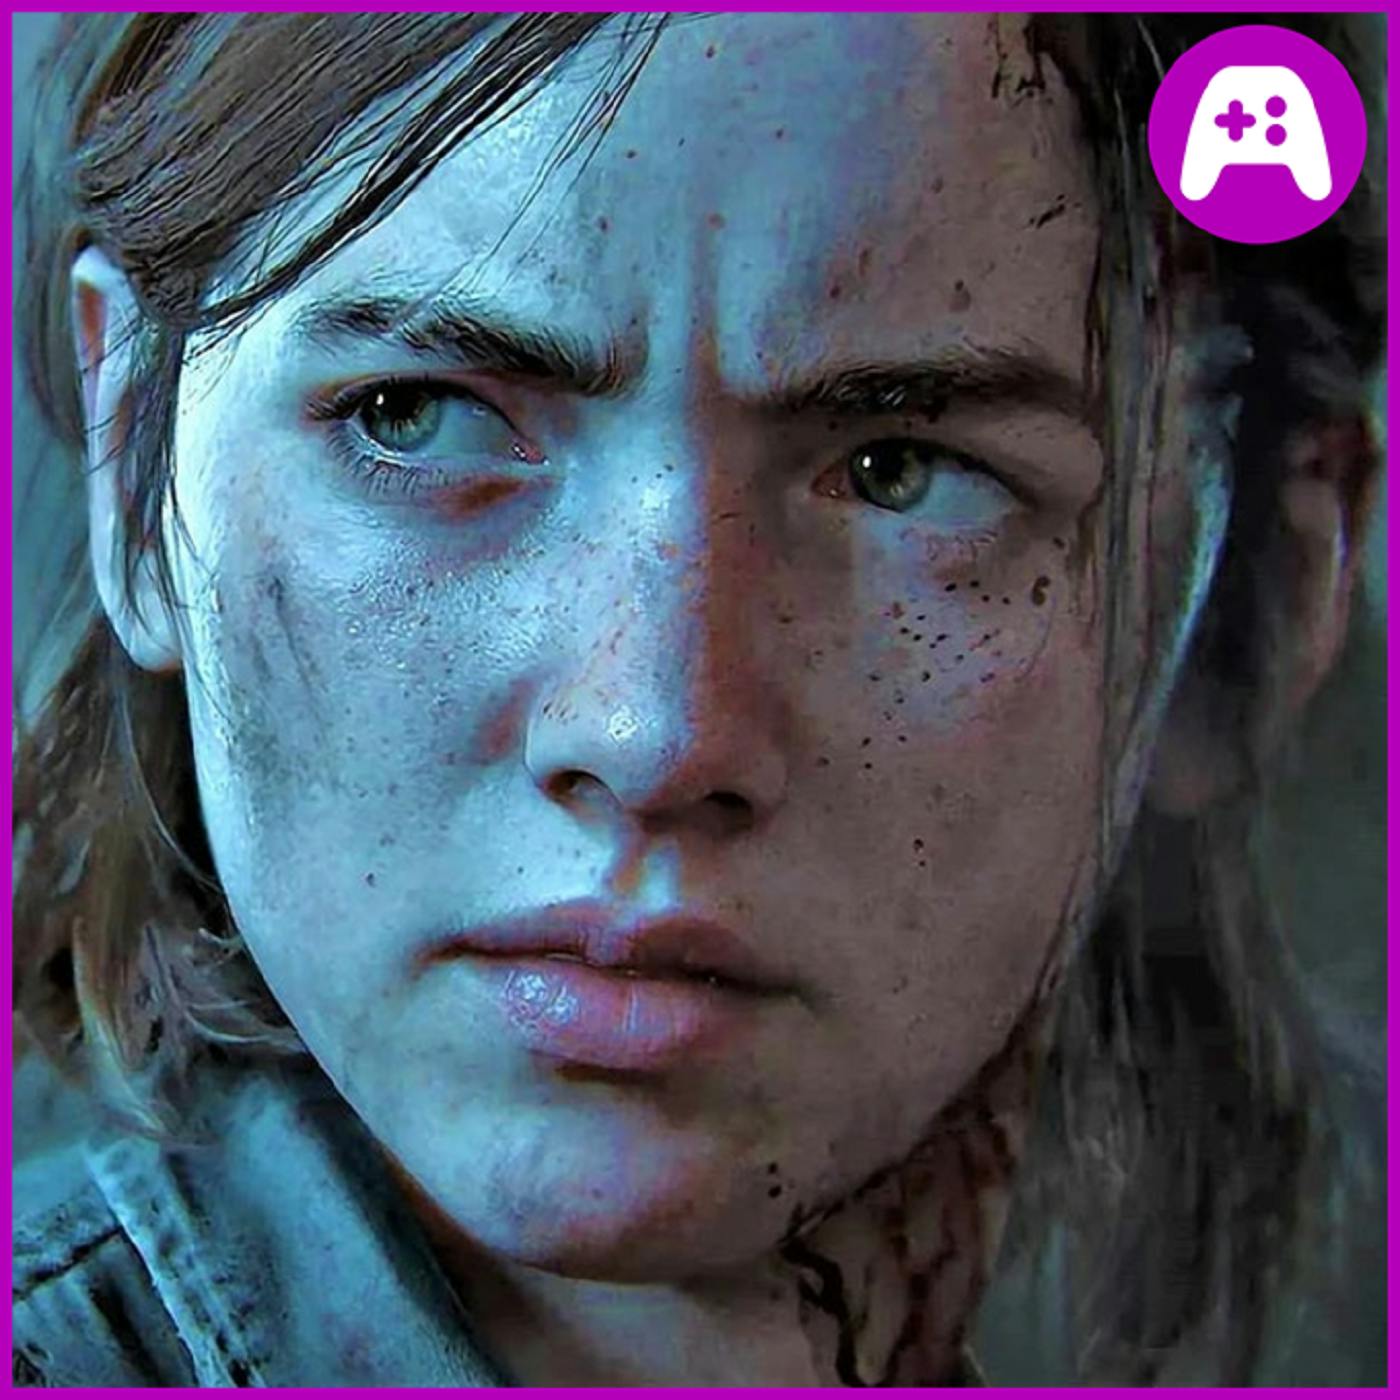 The Last of Us 2 Spoilercast [SPOILERS, DUH] - What's Good Games (Ep. 171)